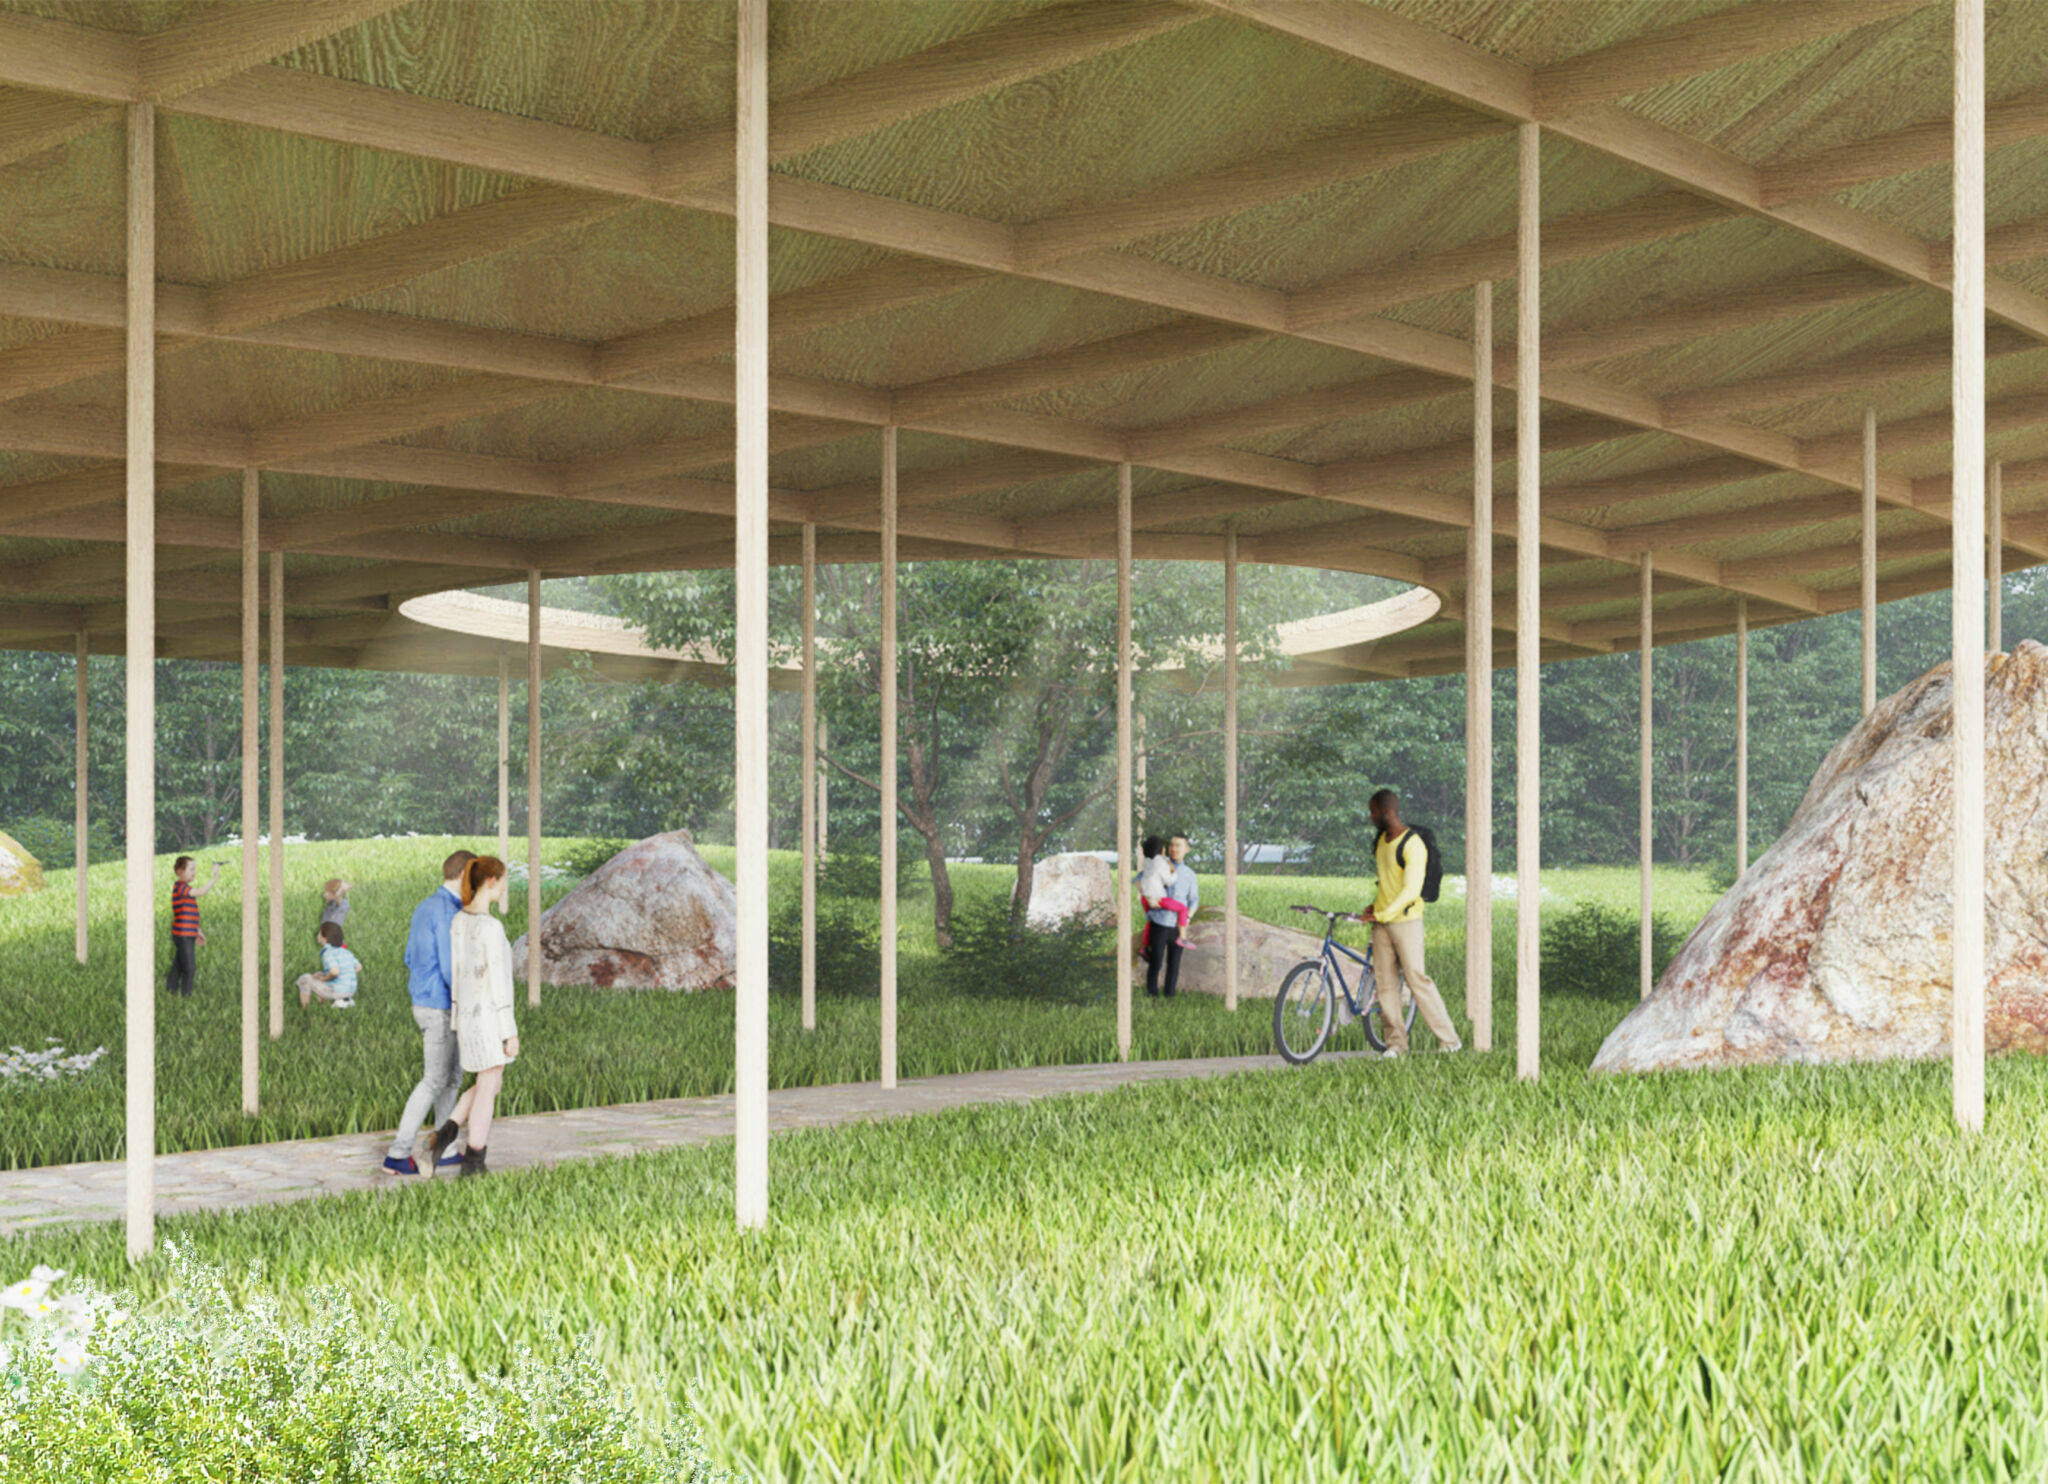 Architectural rendering: People on a pathway leading through an outdoor covered space.